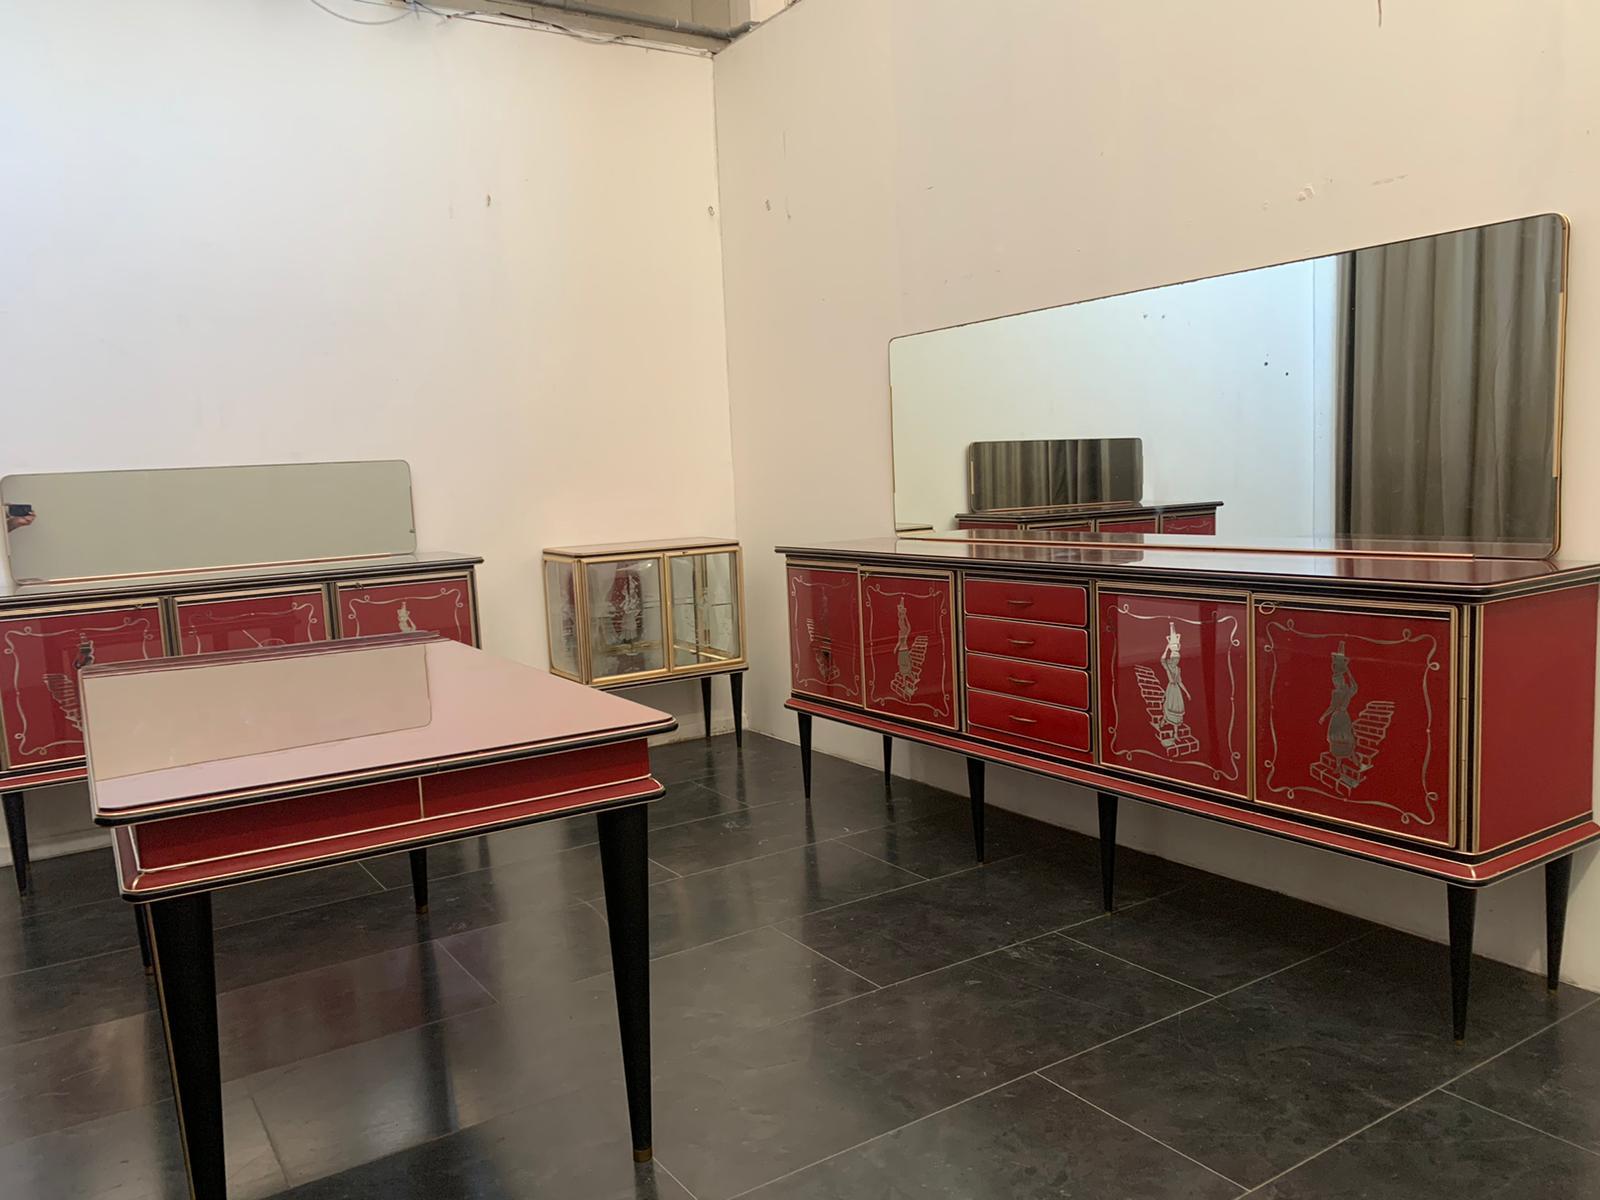 Mascagni set of 2 sideboards with mirror and table for Harrods London, Pompeian red and black leatherette. The corner cabinet in the photo is not available.
Large sideboard h95 X 252 X 50, 
Mirror H72 X 231 X 3, 
Small sideboard H95 X 157 X 50,